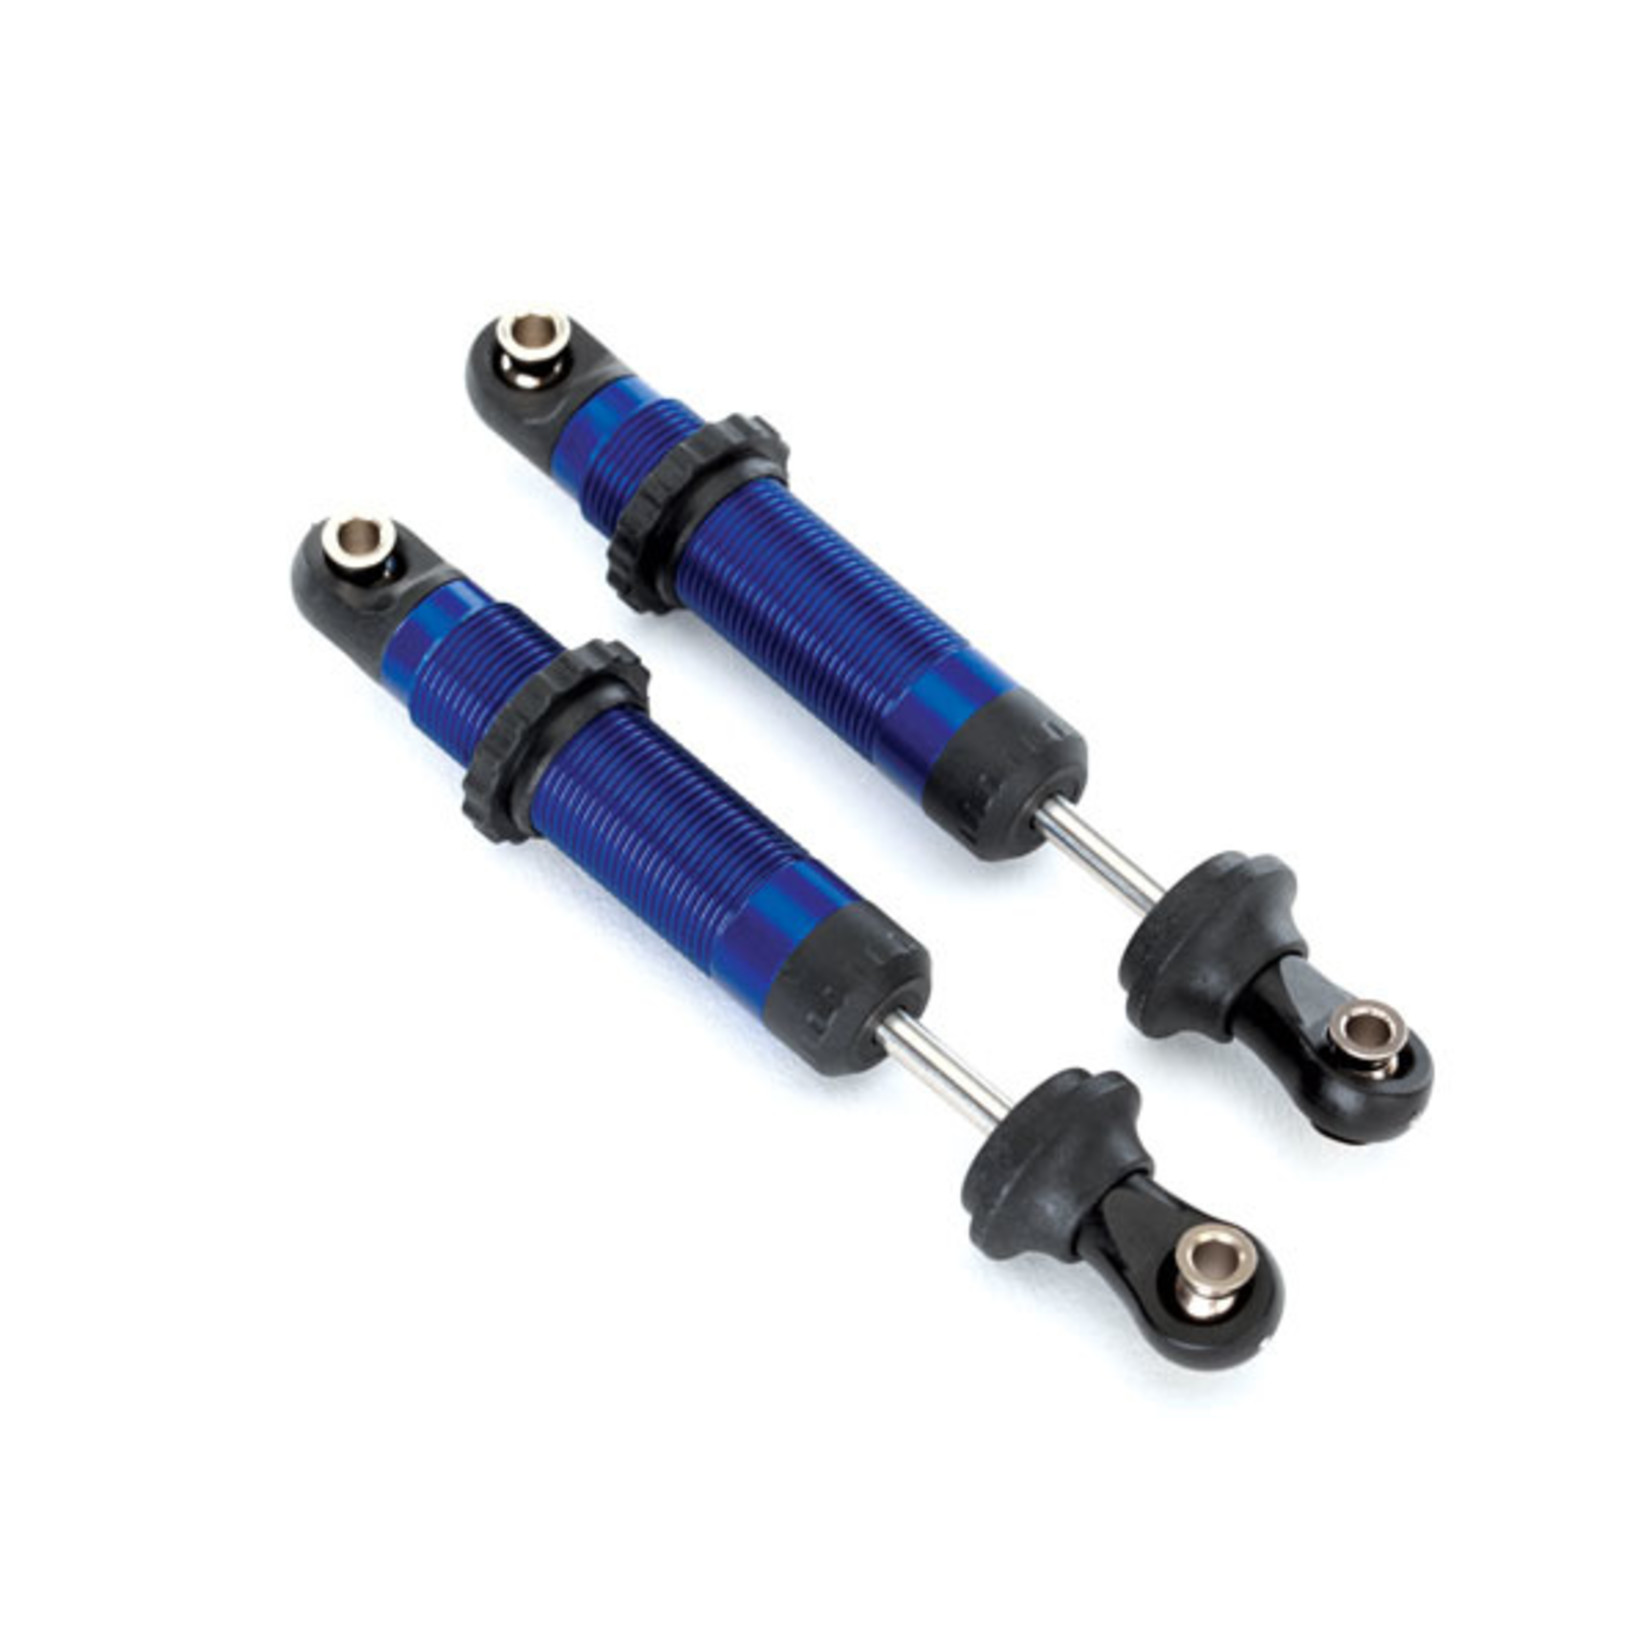 Traxxas 8260A - Shocks, GTS, blue-anodized (assembled with